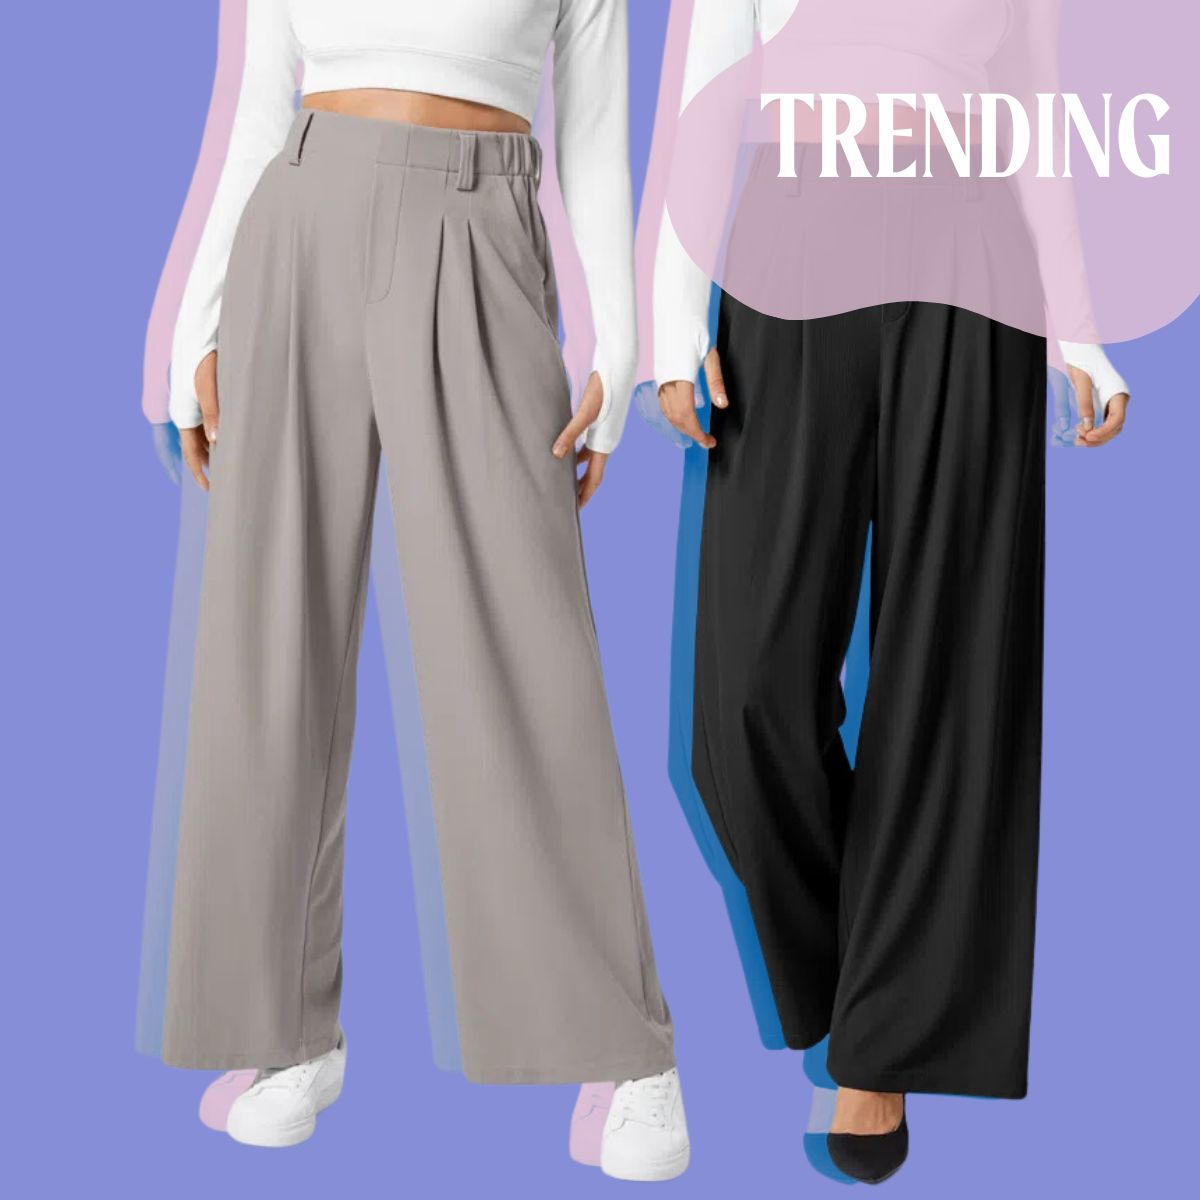 Halara_official check it out on tiktok shop! These flared pants